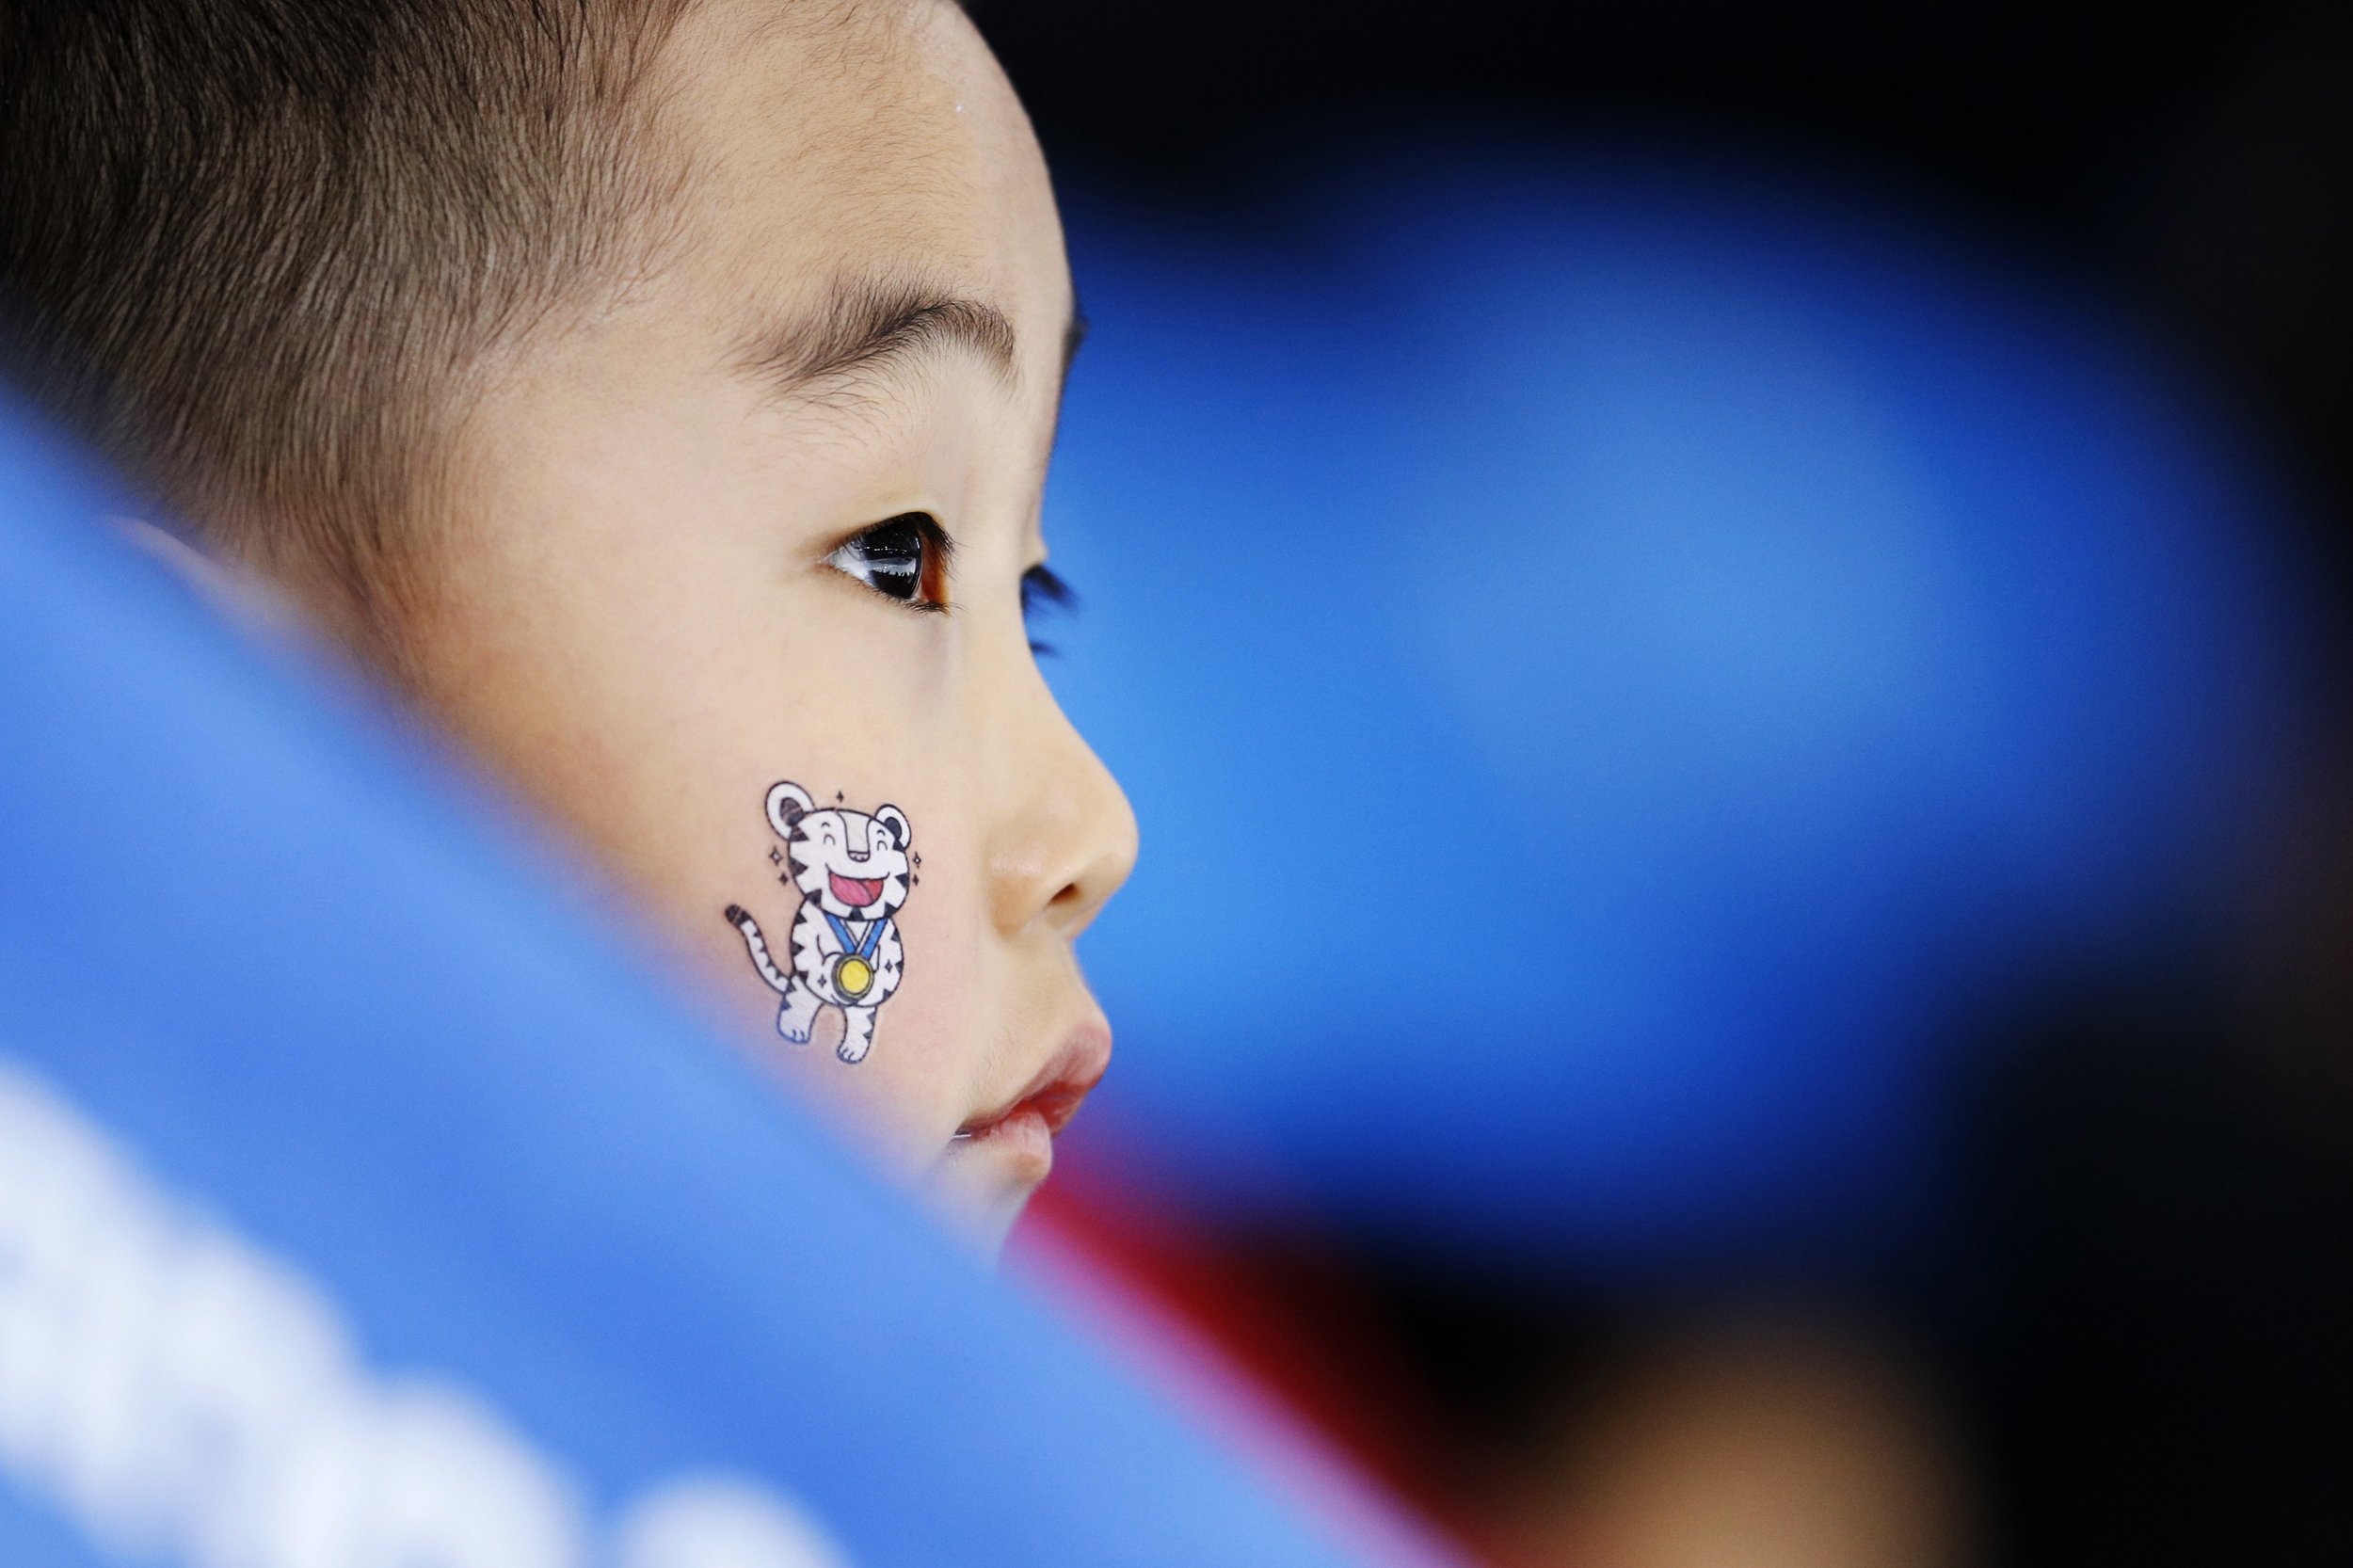  A child wears one of the Olympic mascots on his face when watching the women's 1,500-meter speedskating race at the Gangneung Oval at the 2018 Winter Olympics in Gangneung, South Korea, Feb. 12, 2018. (AP Photo/John Locher) 